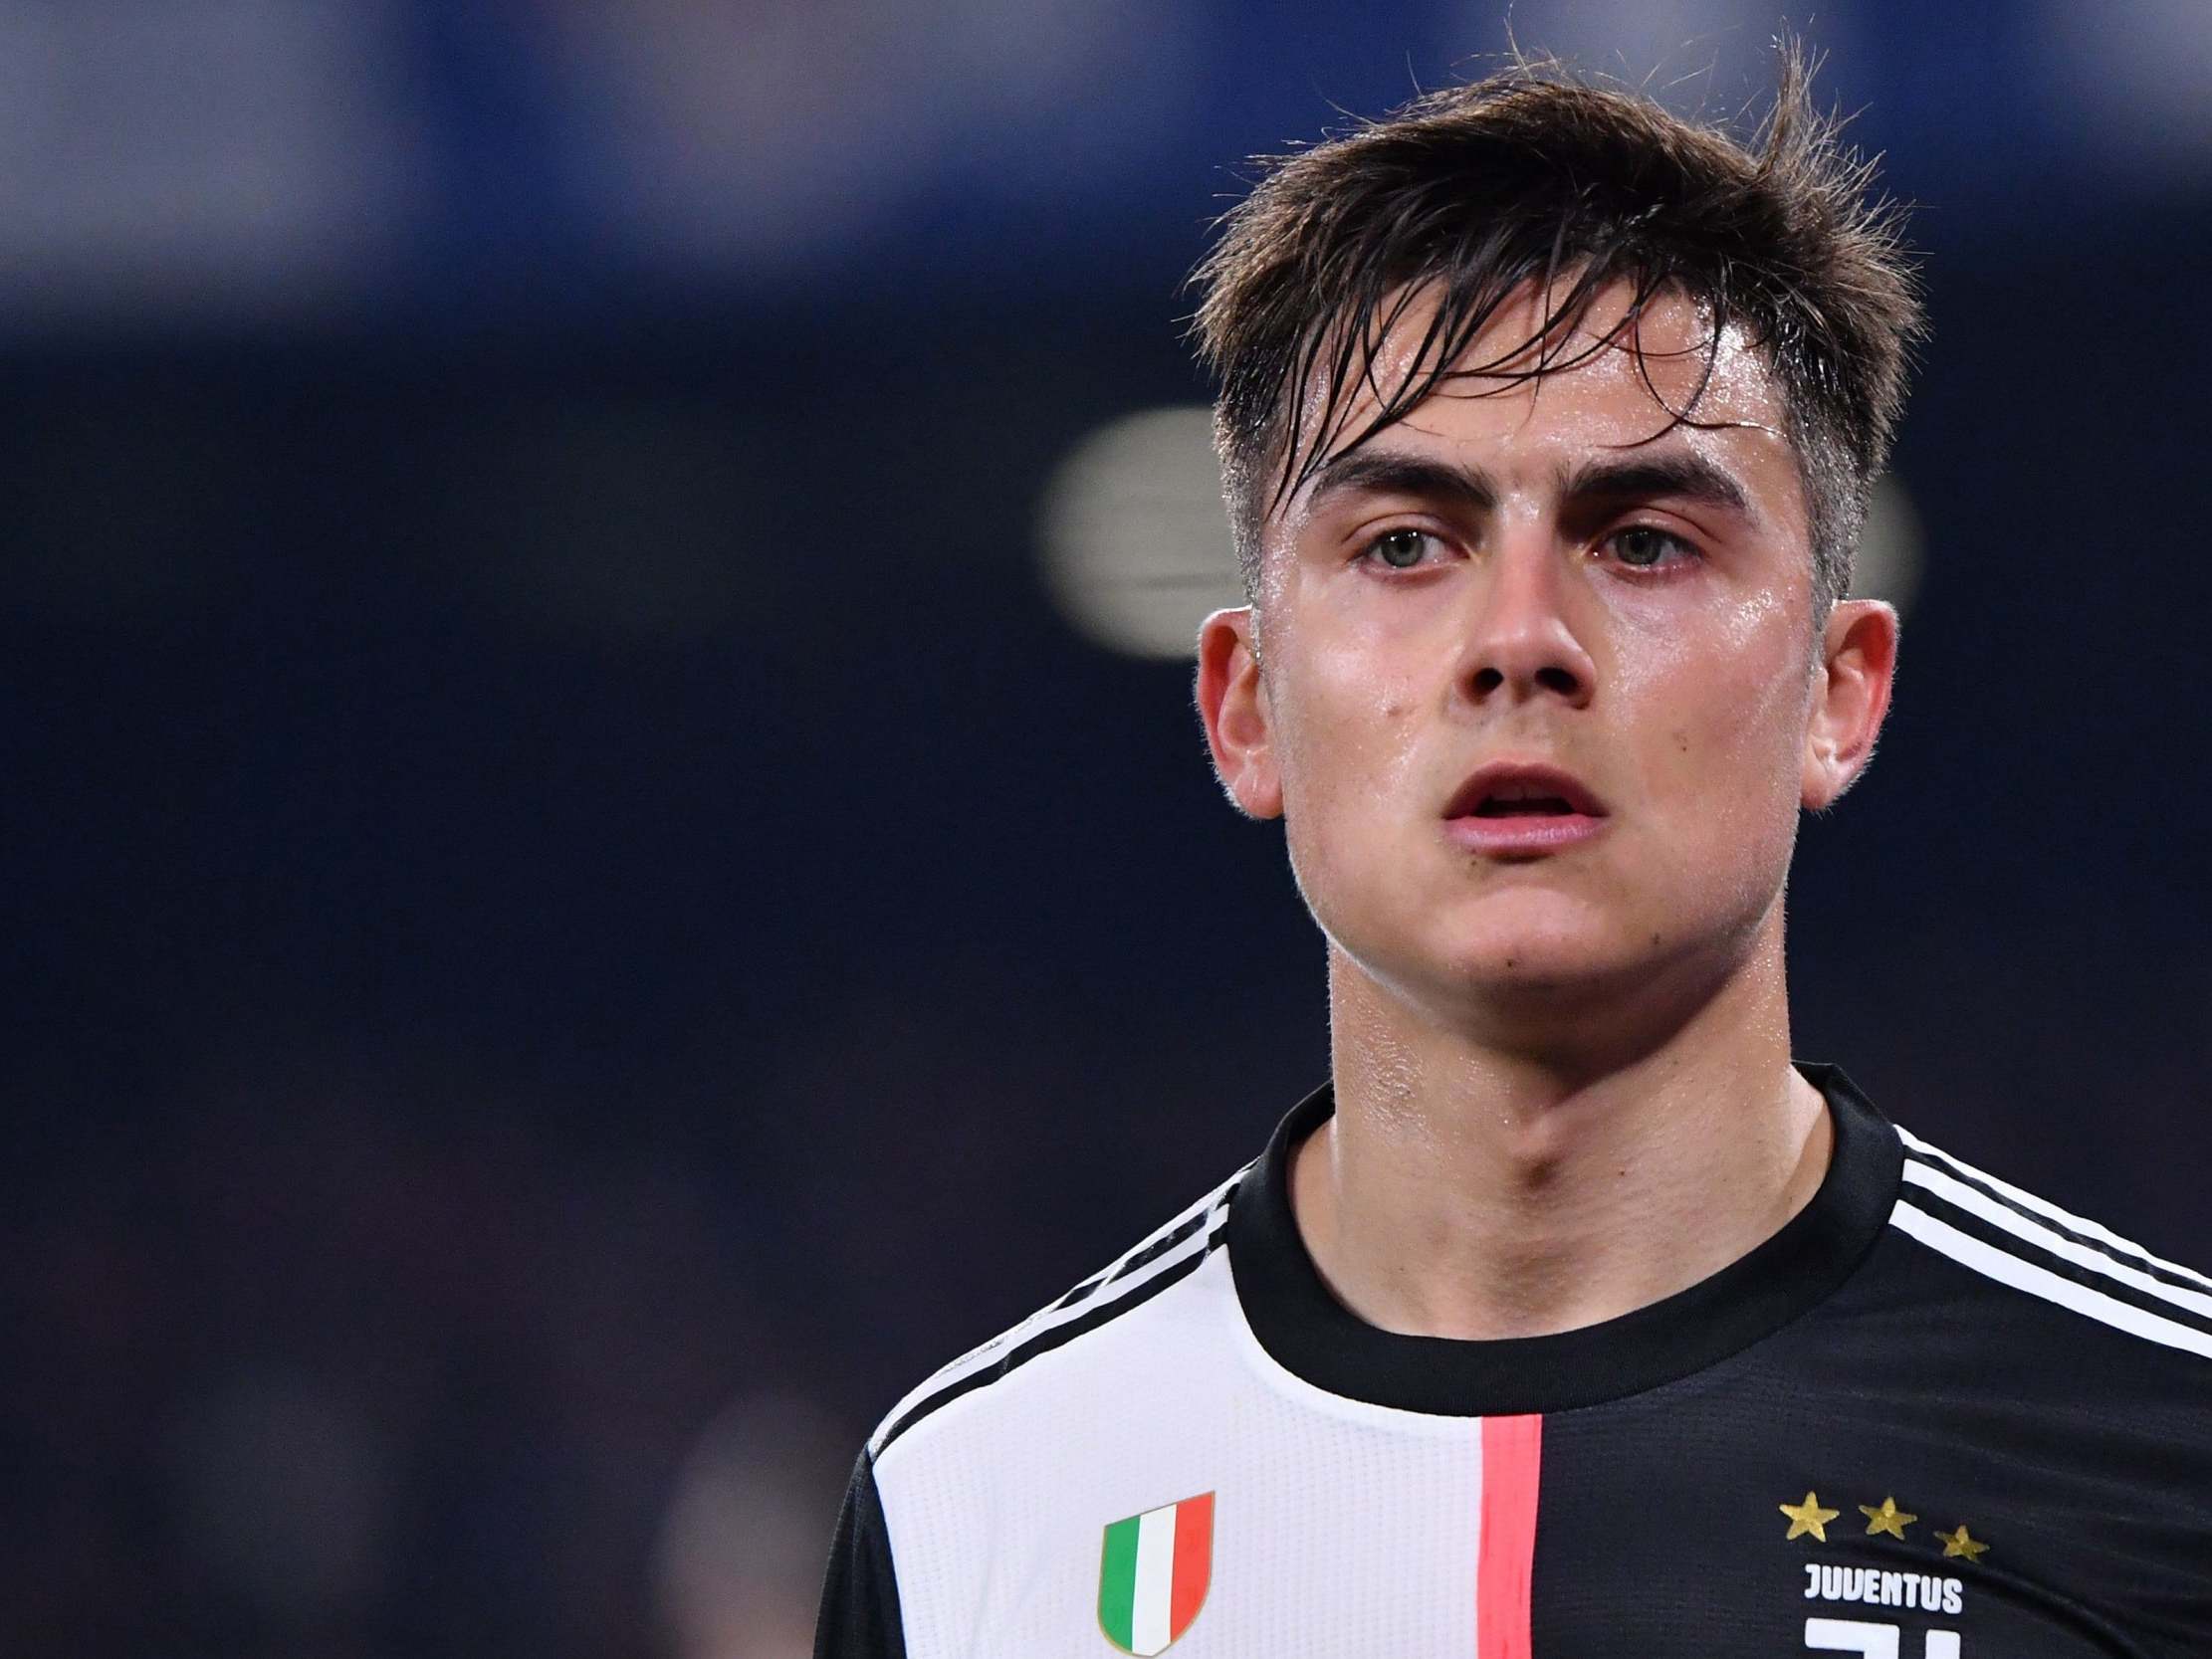 Juventus will give Dybala time to grow, says Marotta | beIN SPORTS